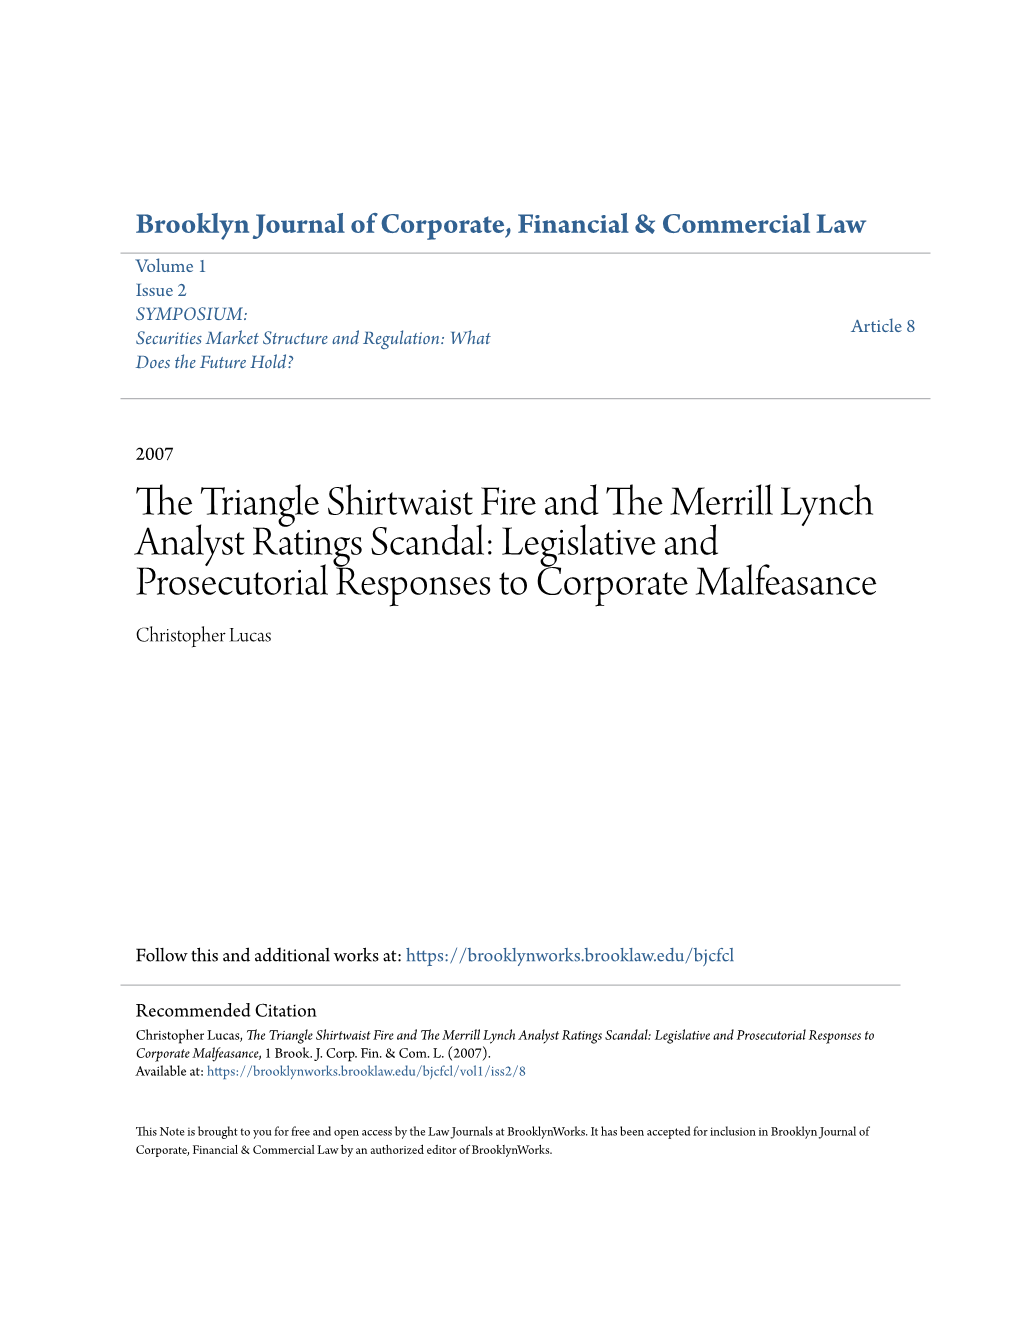 The Triangle Shirtwaist Fire and the Merrill Lynch Analyst Ratings Scandal: Legislative and Prosecutorial Responses to Corporate Malfeasance, 1 Brook